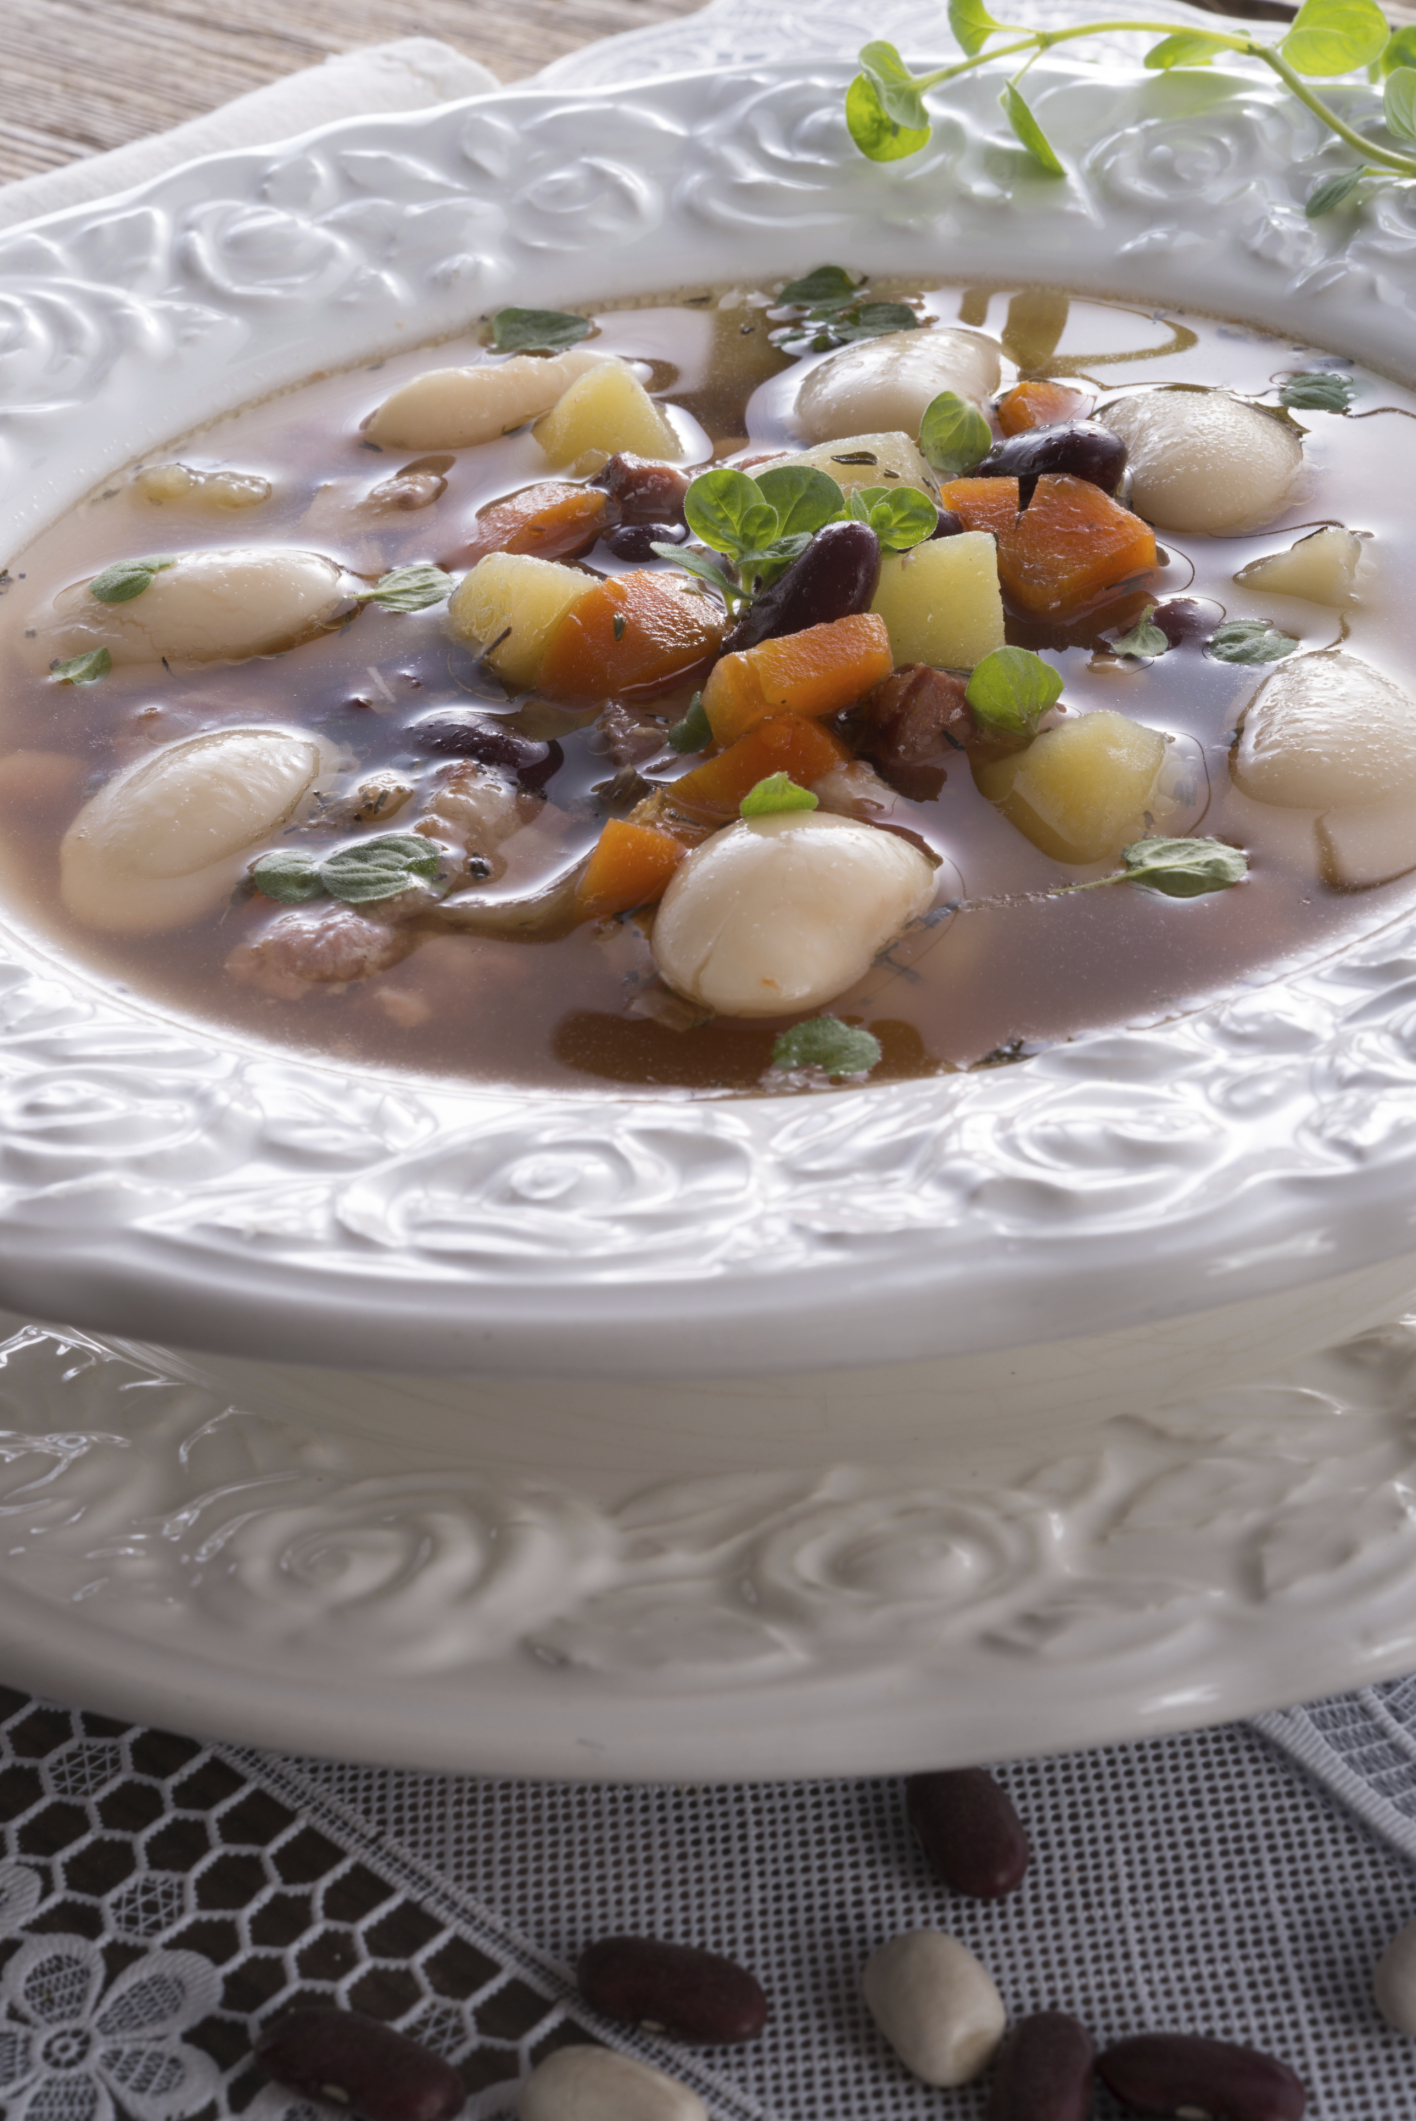 Tuscany soup with Wisconsin potatoes